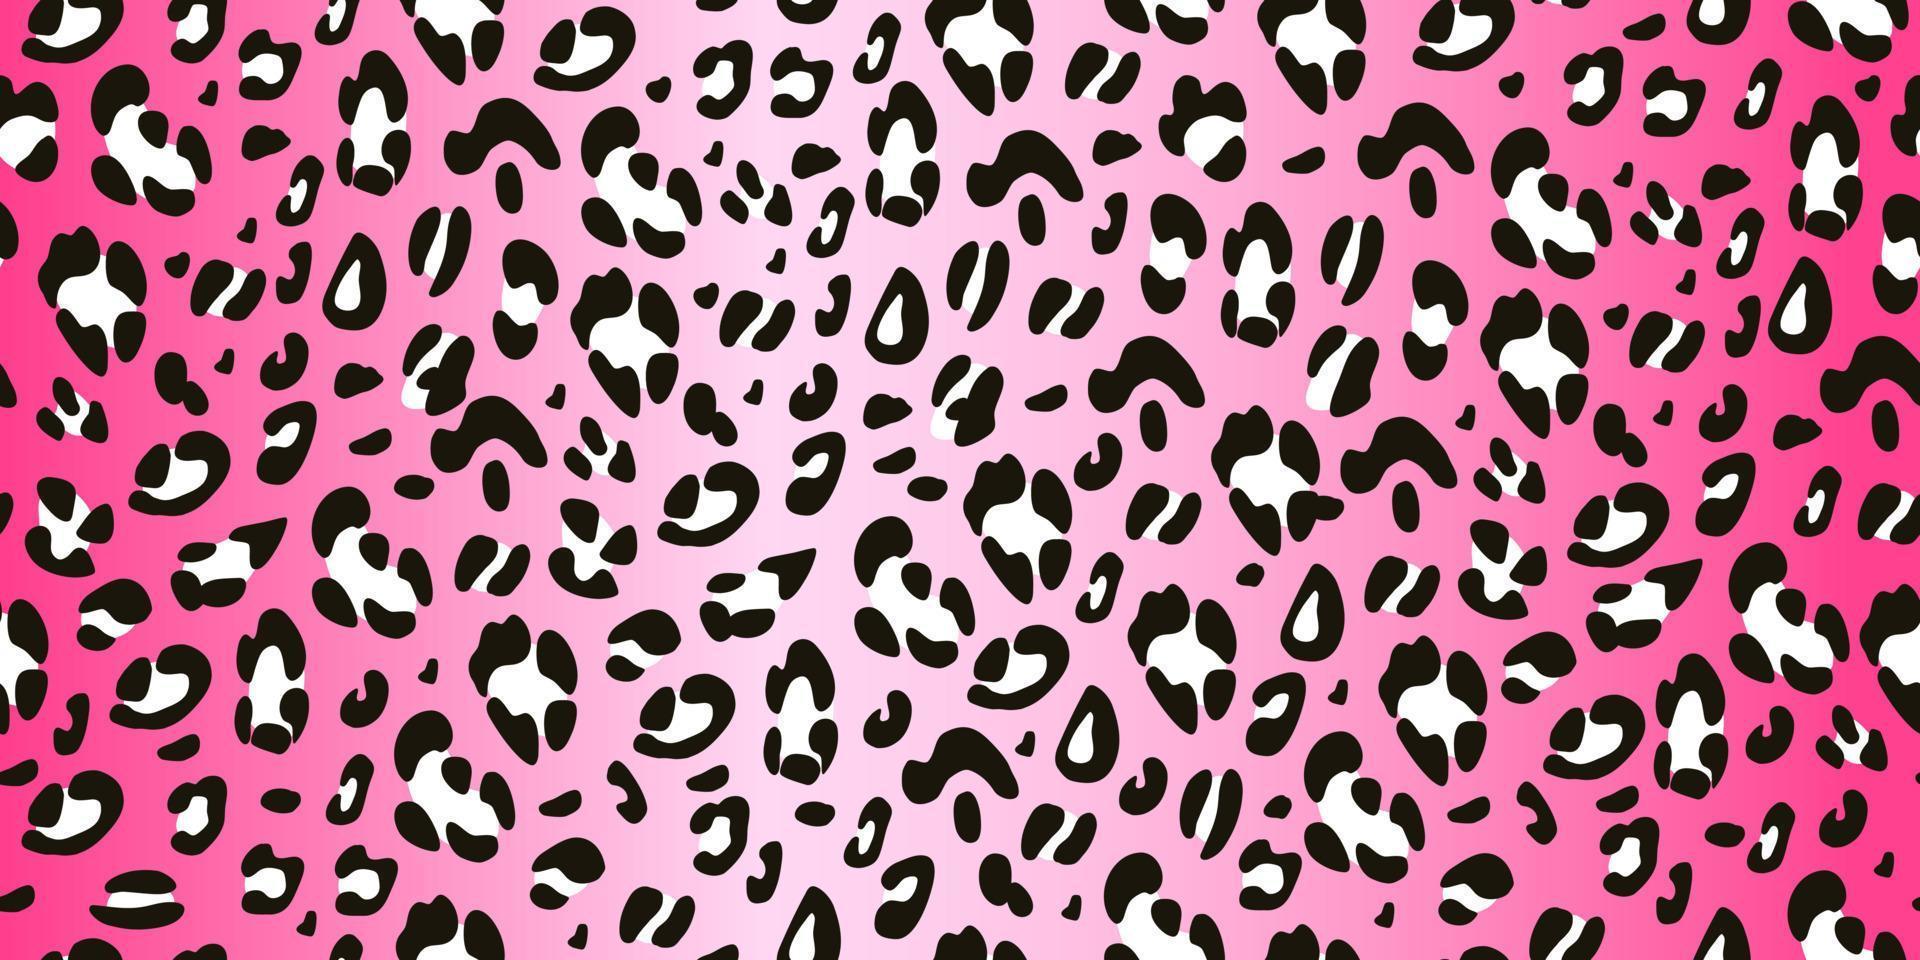 Leopard black and white pattern on pink background seamless pattern. Animalistic hand-drawn background. Vector illustration